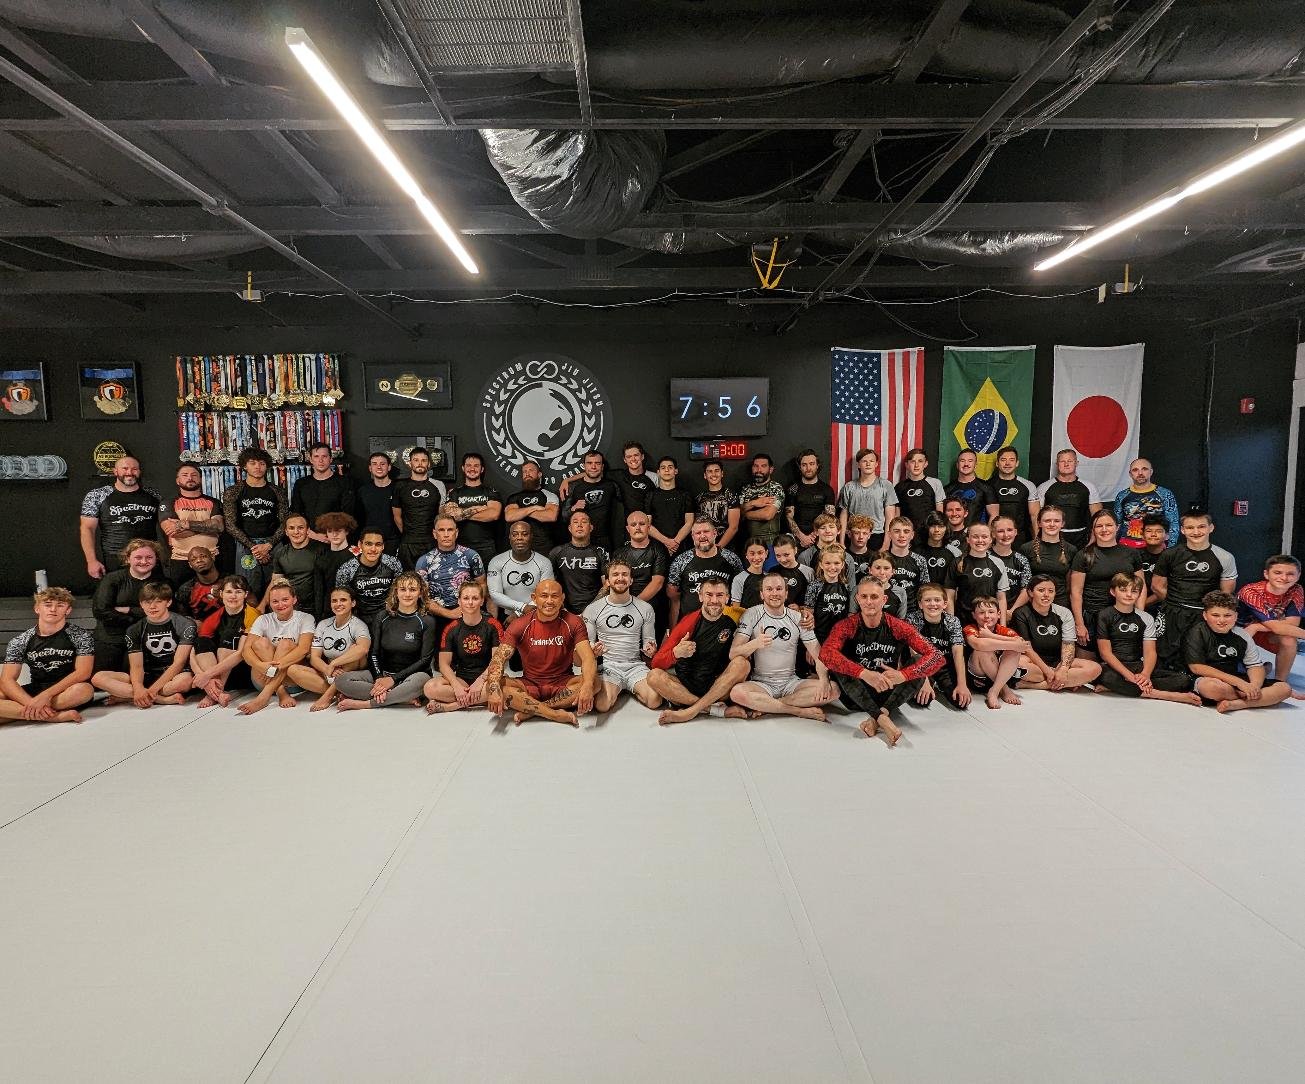 SPECTRUM JIU JITSU X ROB BIERNACKI

Thank you again to Rob Biernacki for teaching an excellent seminar focused on passing and guard retention! We had a great showing by our students and know that they took away a lot of useful information!